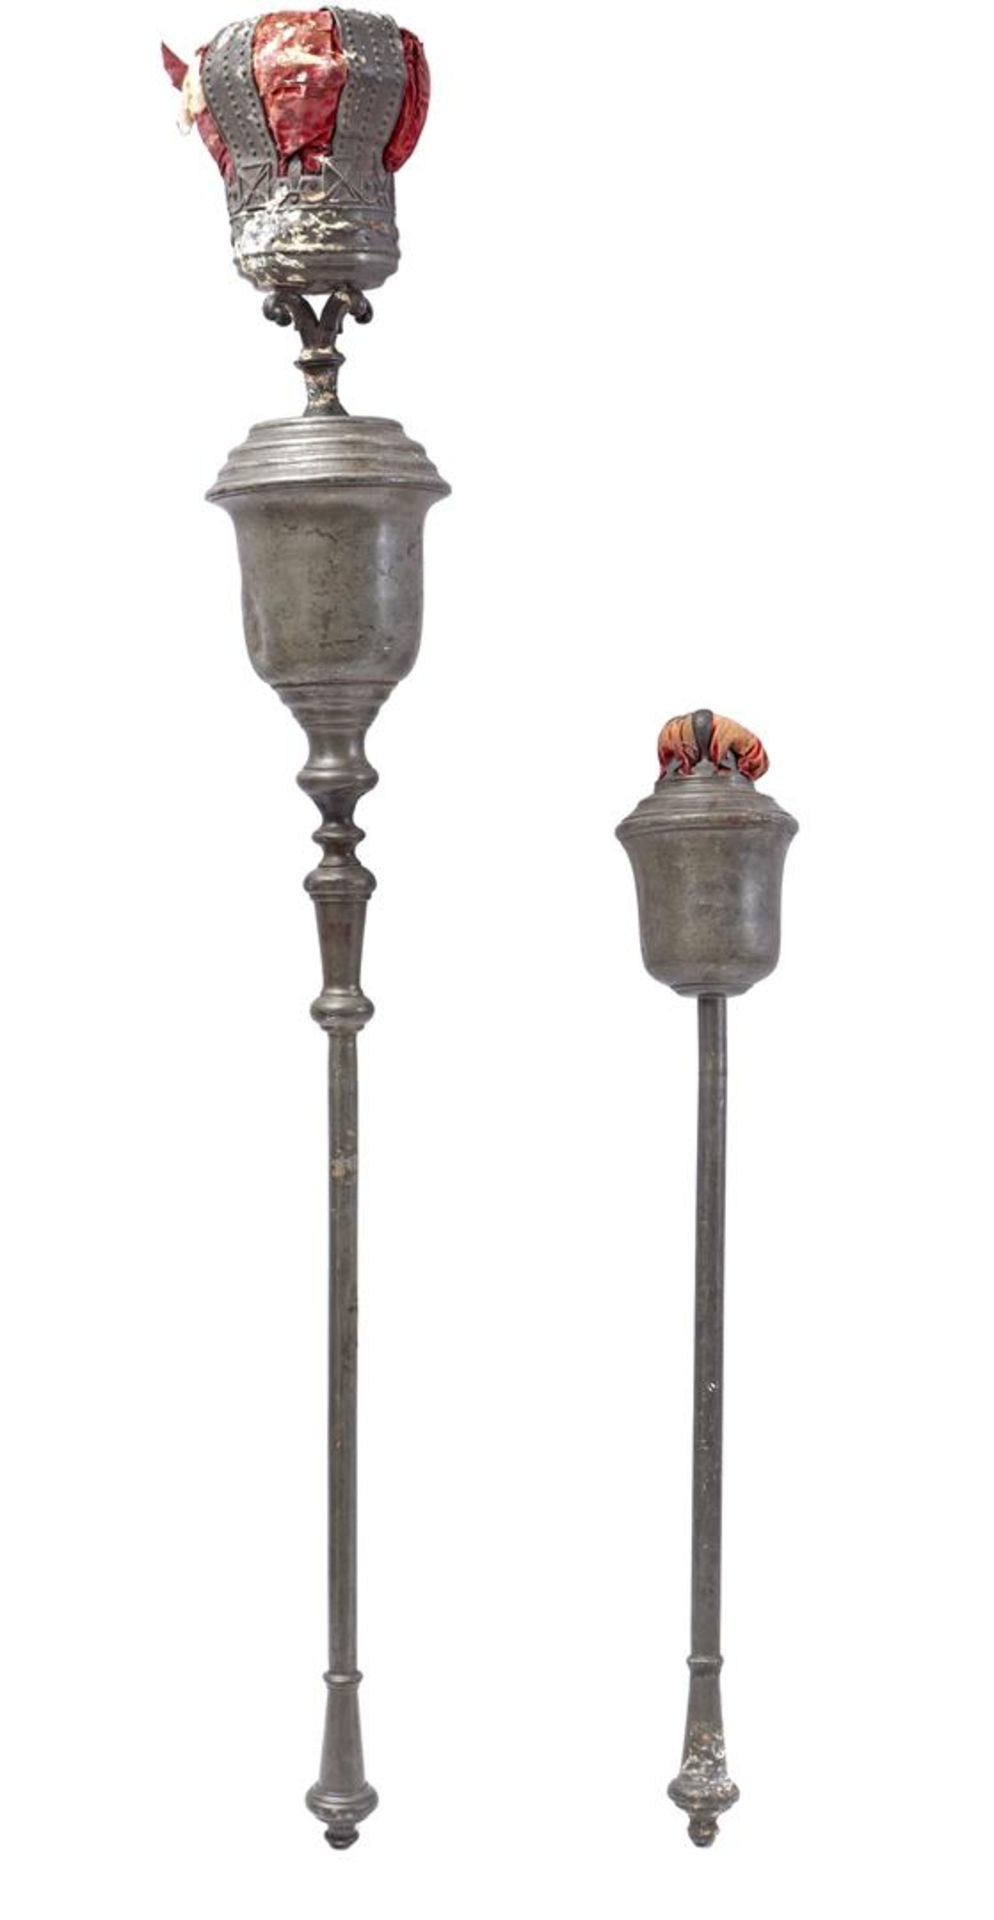 2 pewter stanchions